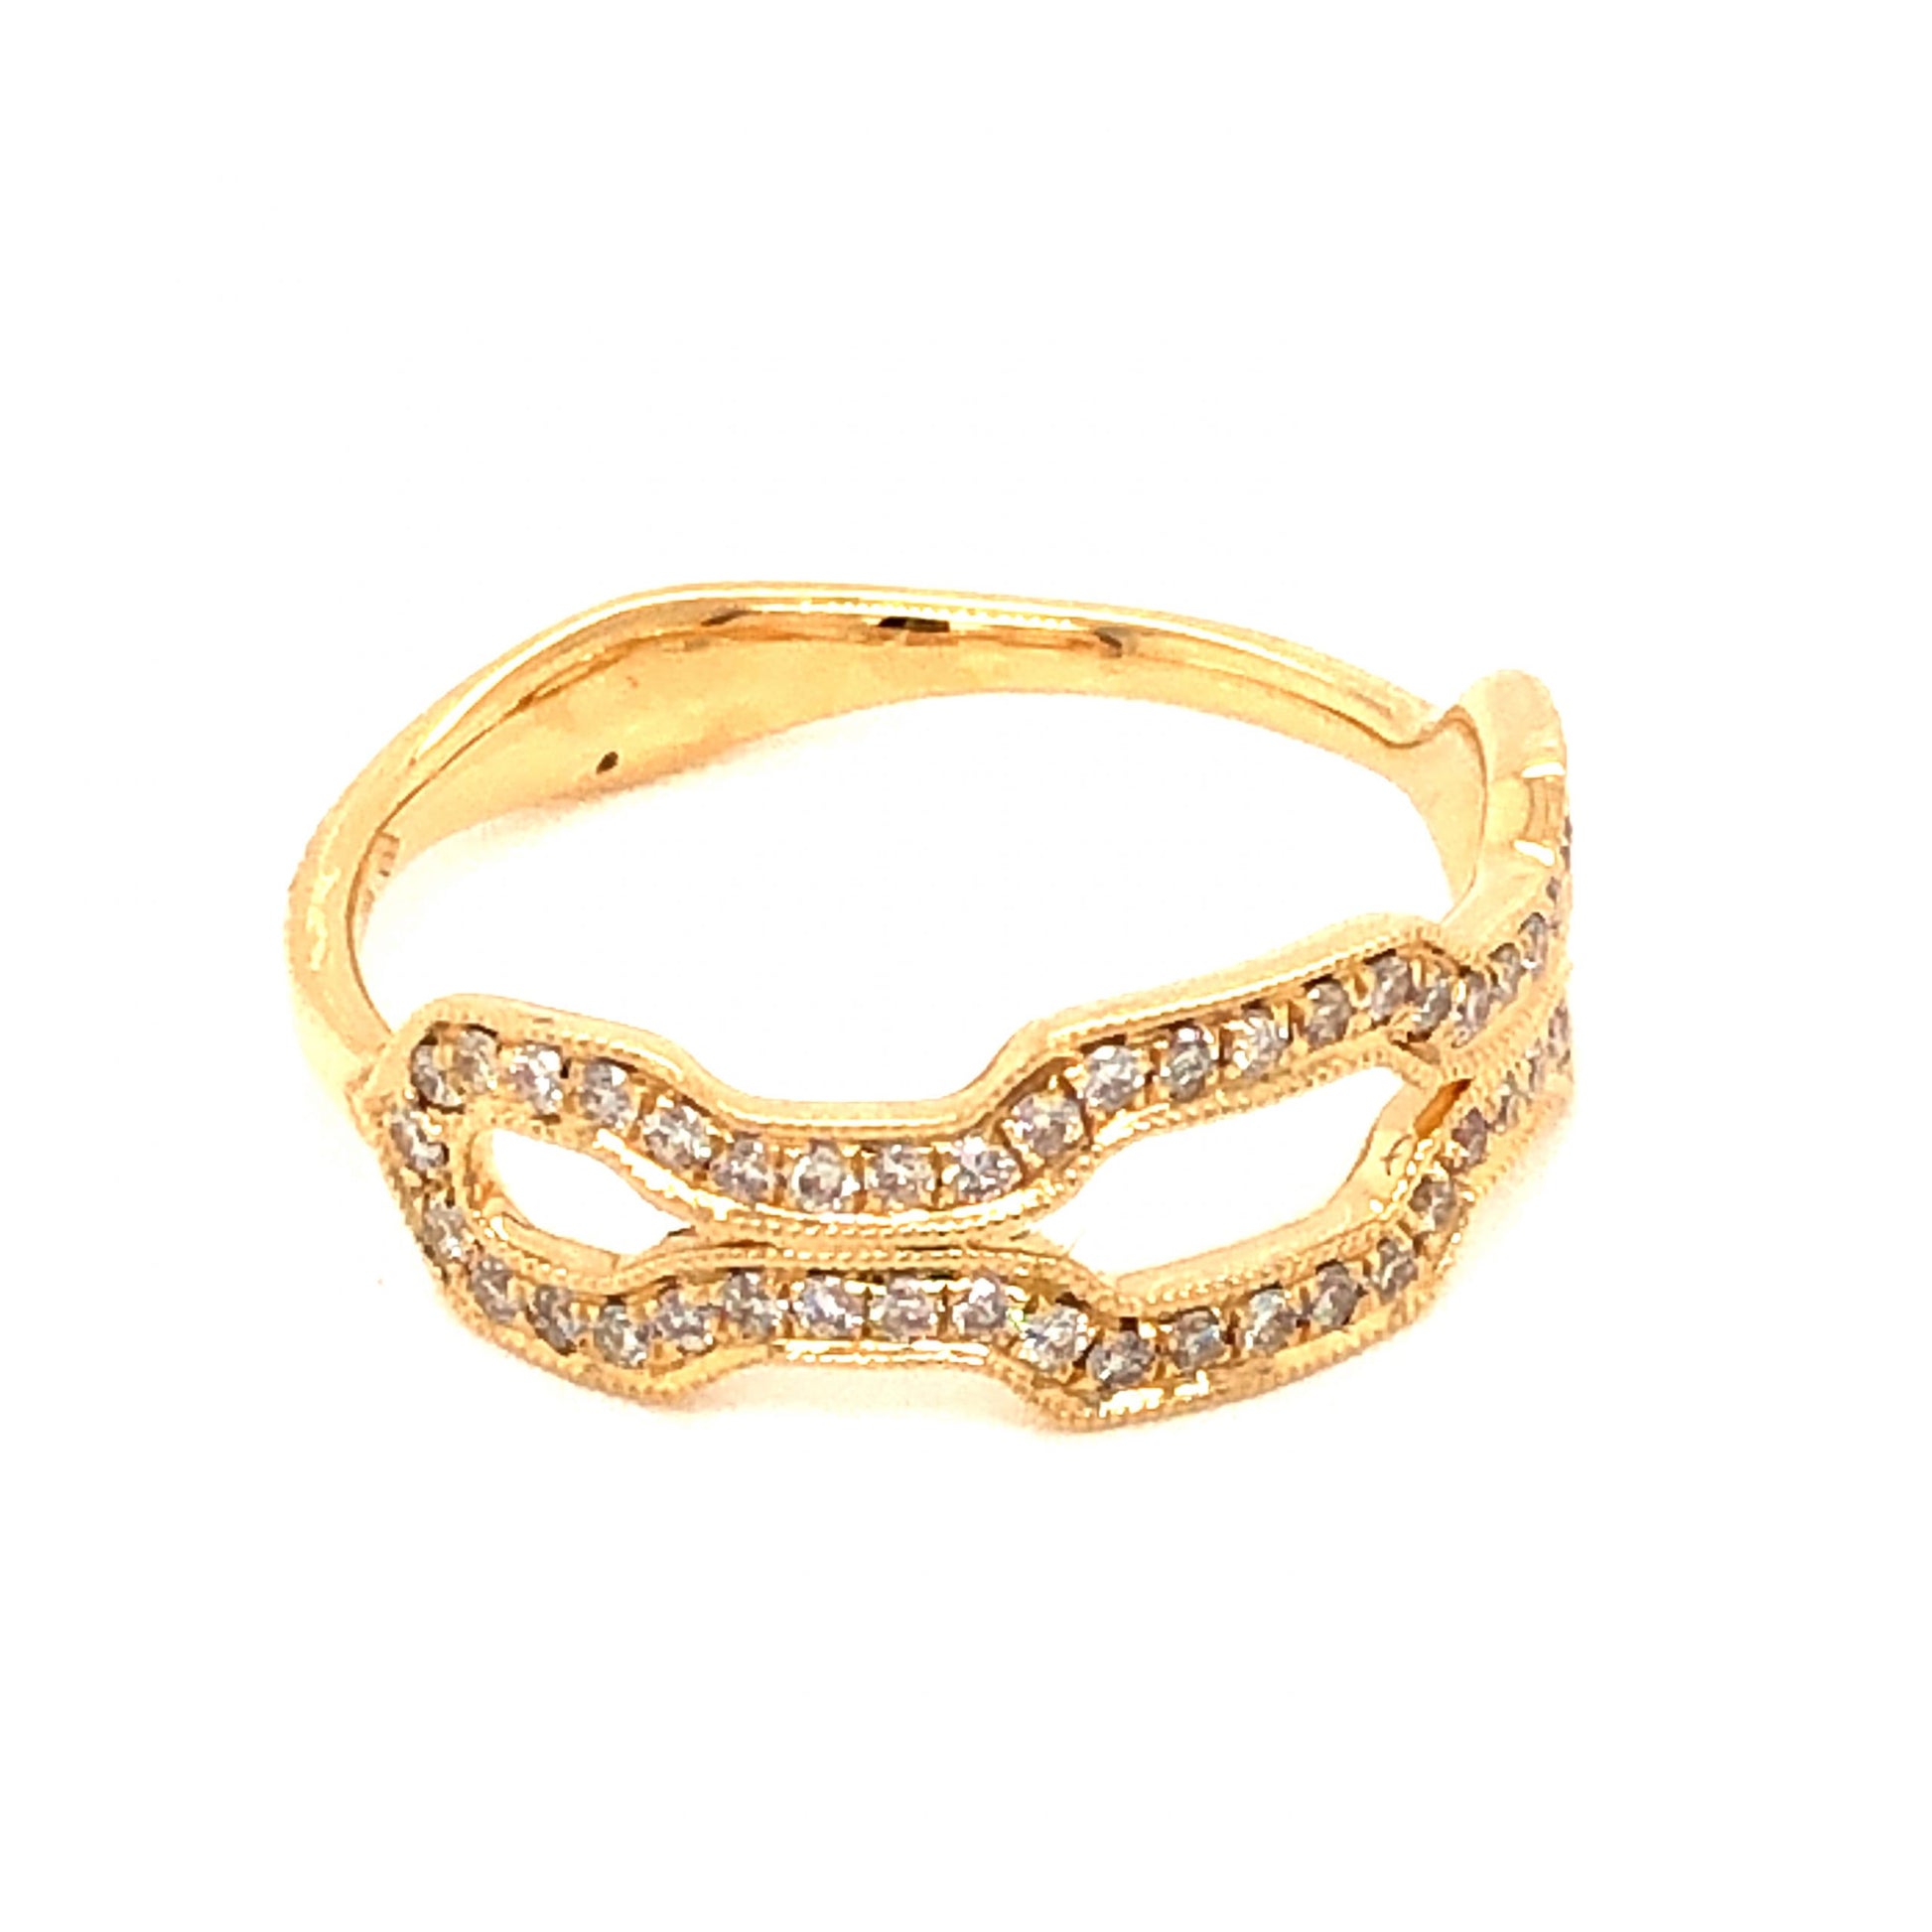 .27 Diamond Geometric Stacking Band in 18k Yellow GoldComposition: PlatinumRing Size: 6.5Total Diamond Weight: .27 ctTotal Gram Weight: 2.8 gInscription: JHK, 18K, 750 